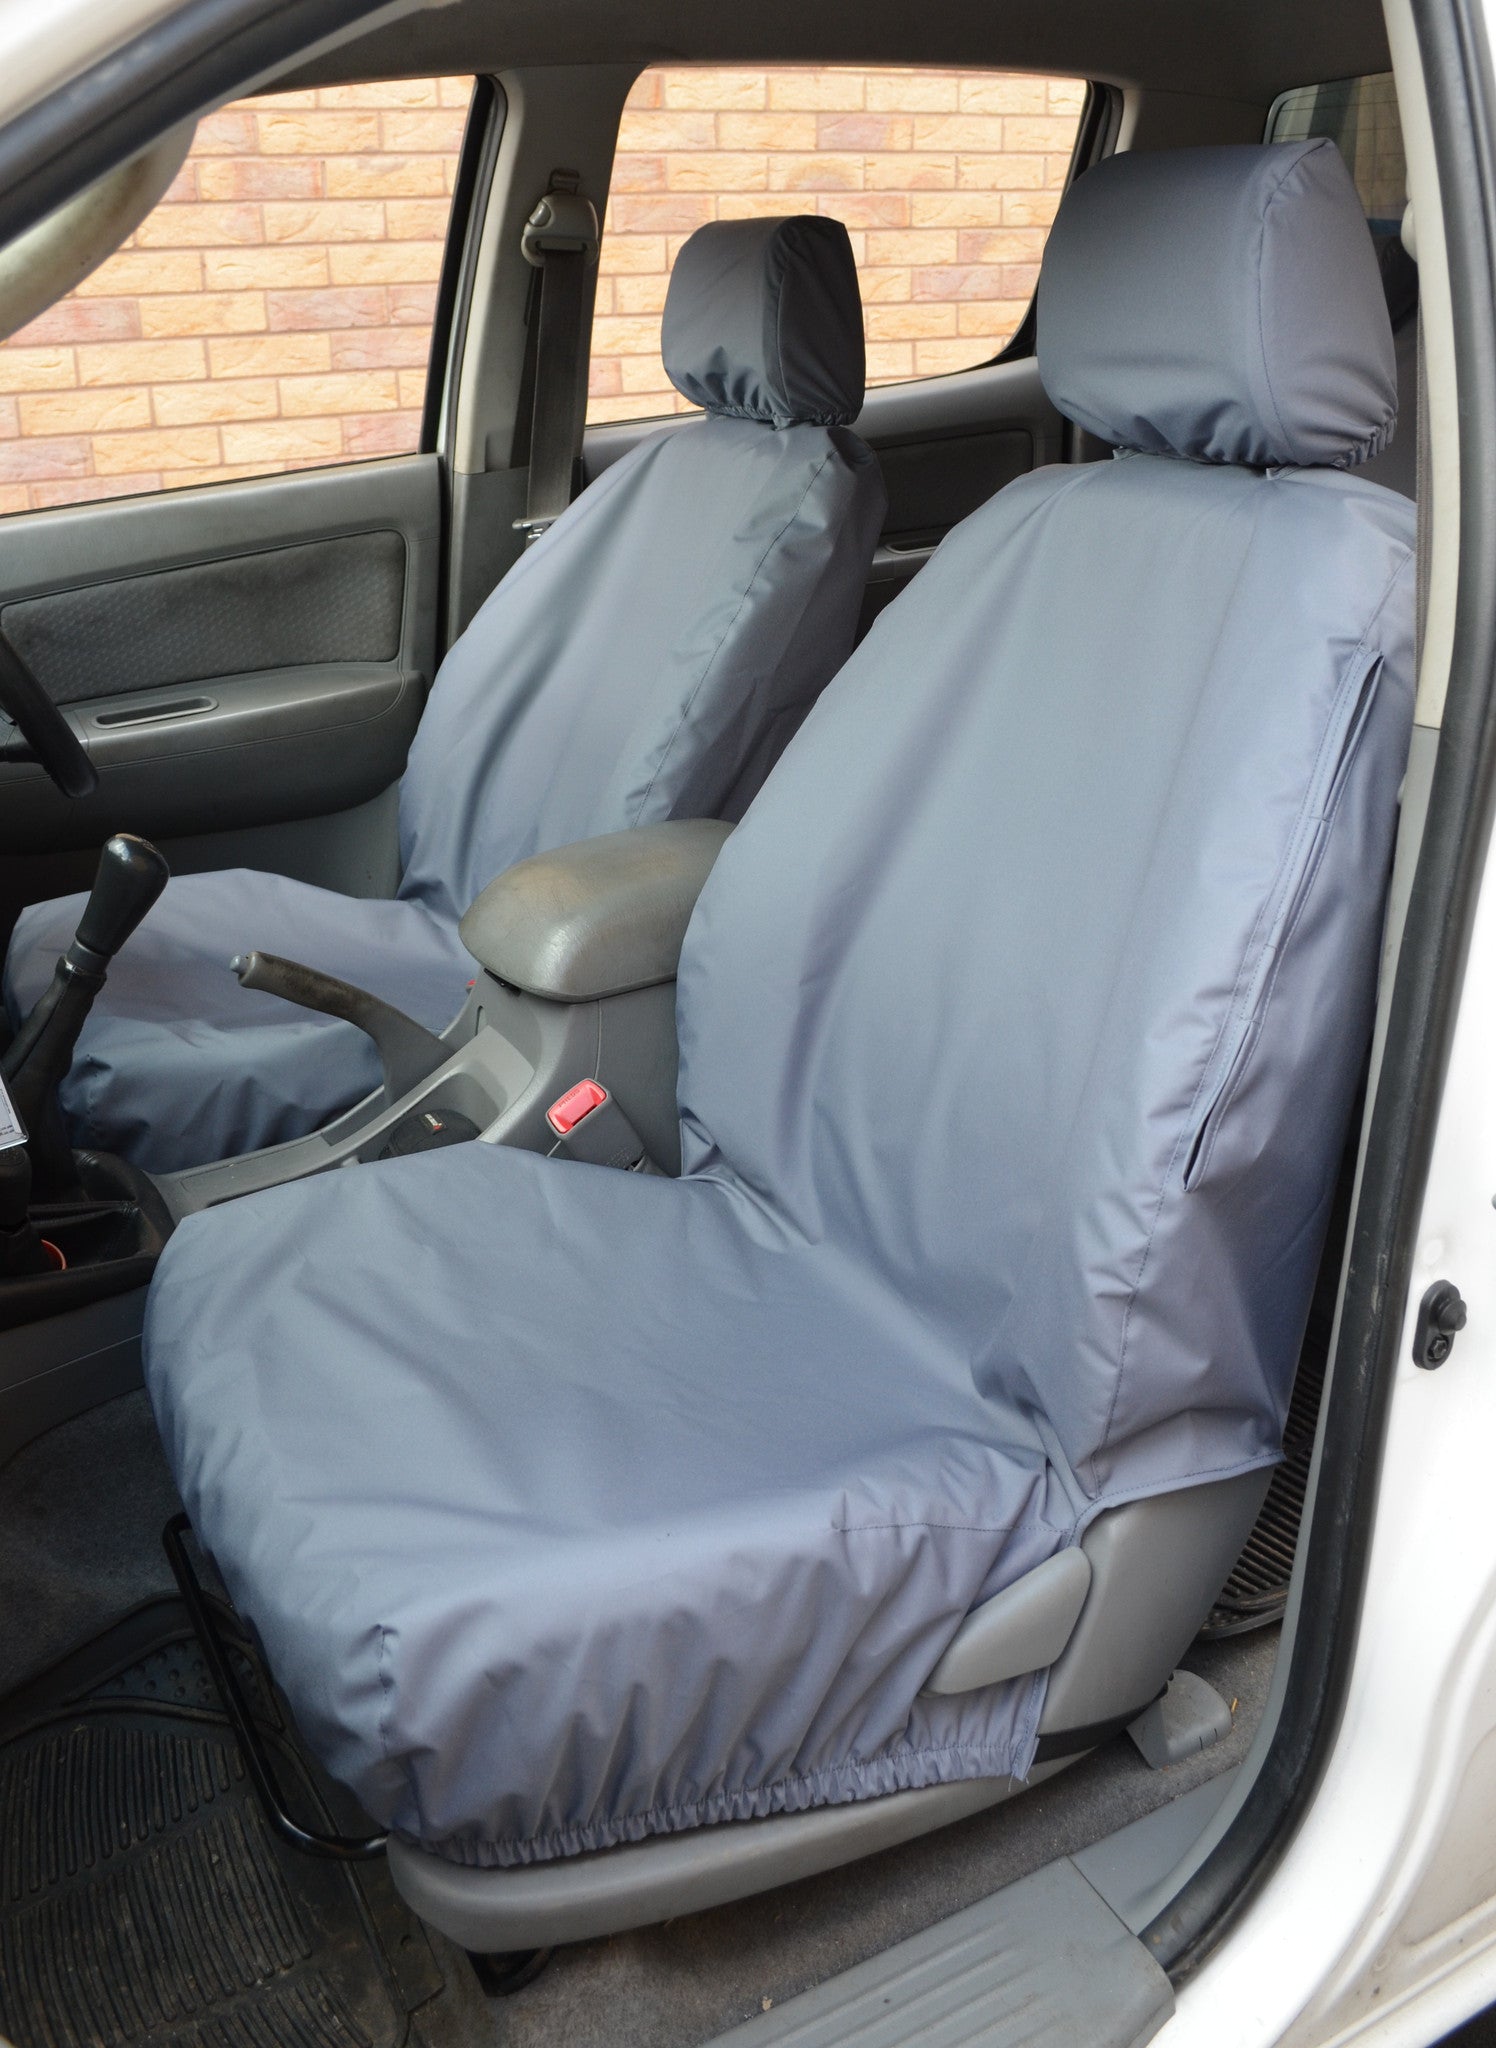 Toyota Hilux 2005 - 2016 Seat Covers Front Pair / Grey Turtle Covers Ltd